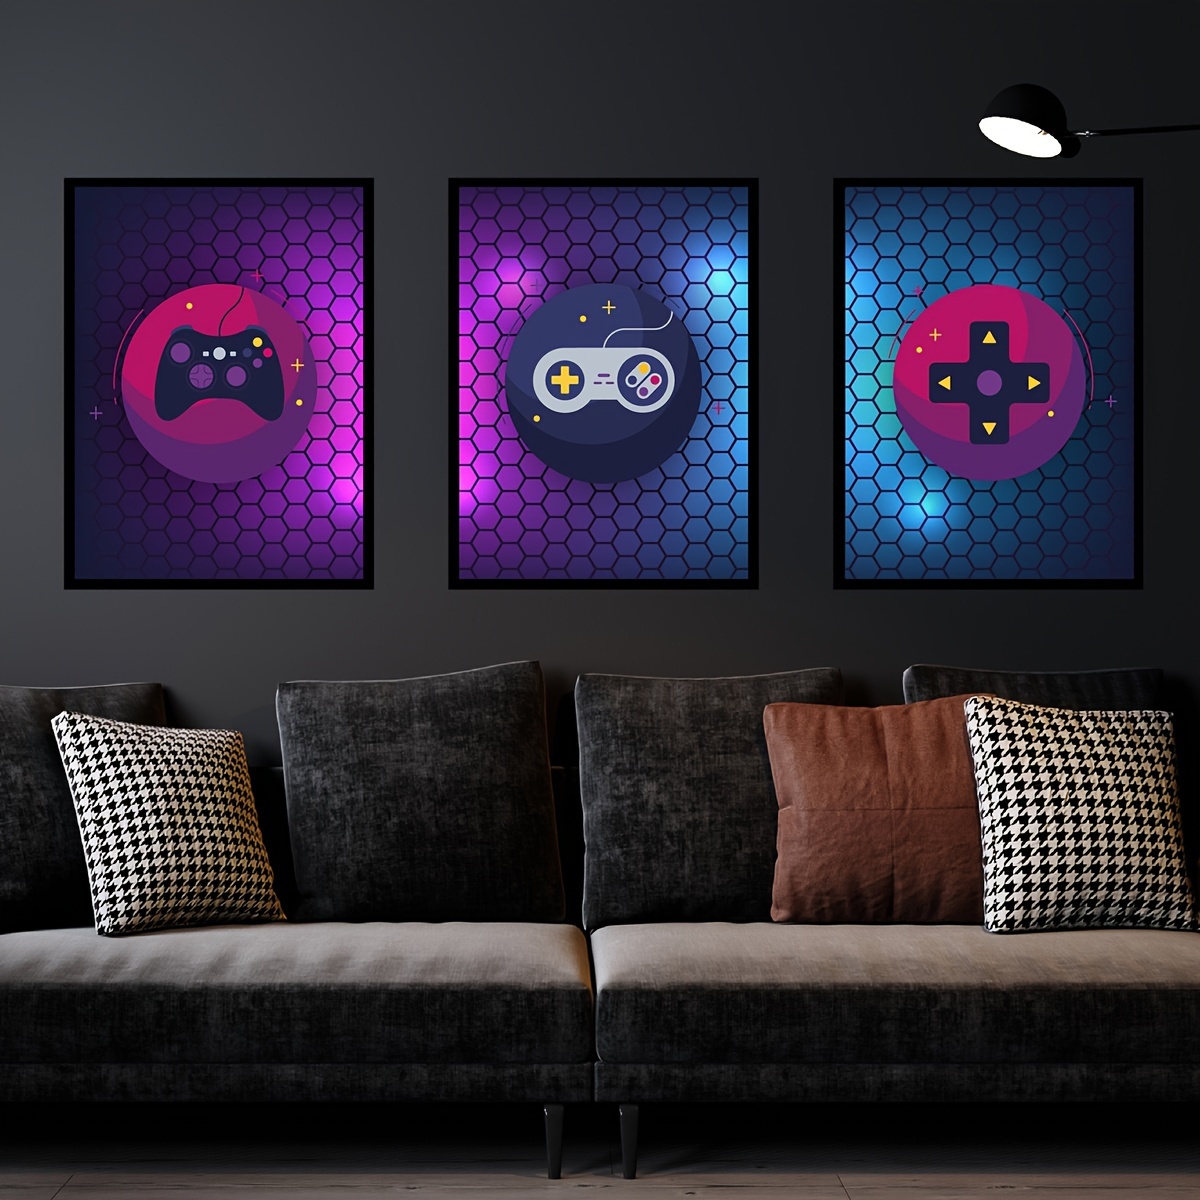 Affiche Gamer Décoration Murale - Gamer Poster, Deco Gaming, Affiche murale,  Deco chambre